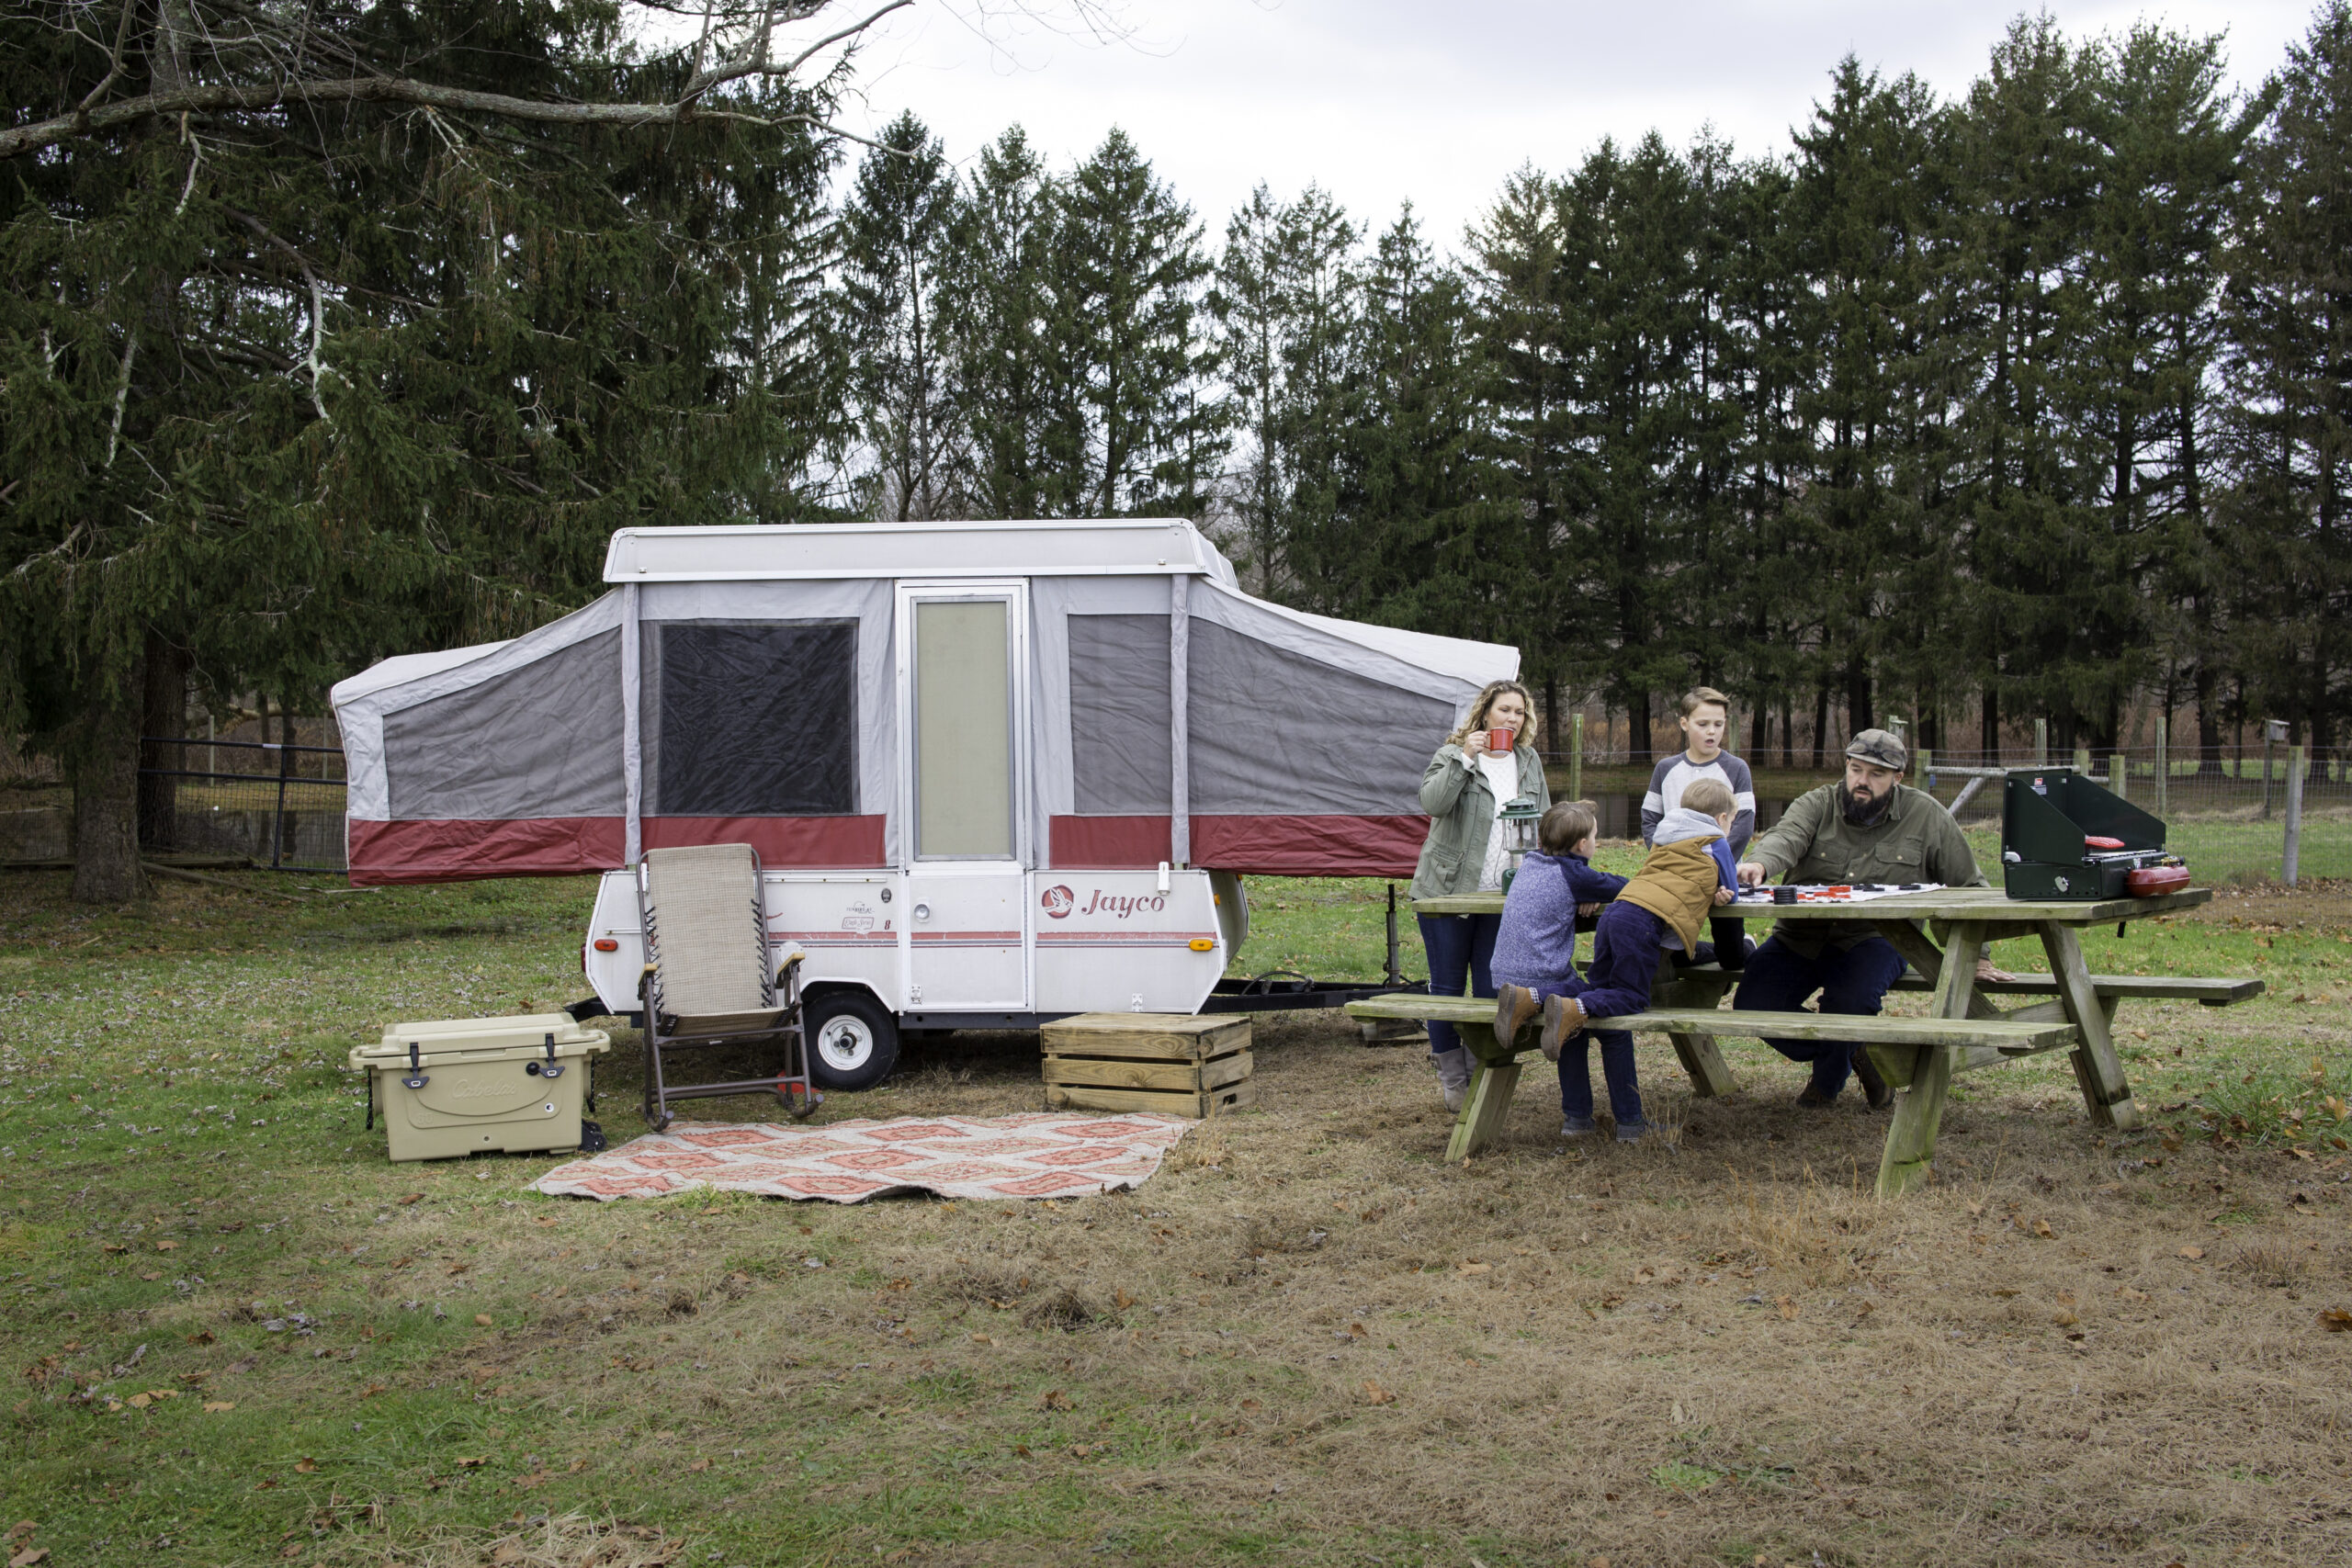 A family in front of a pop up camper at the campground